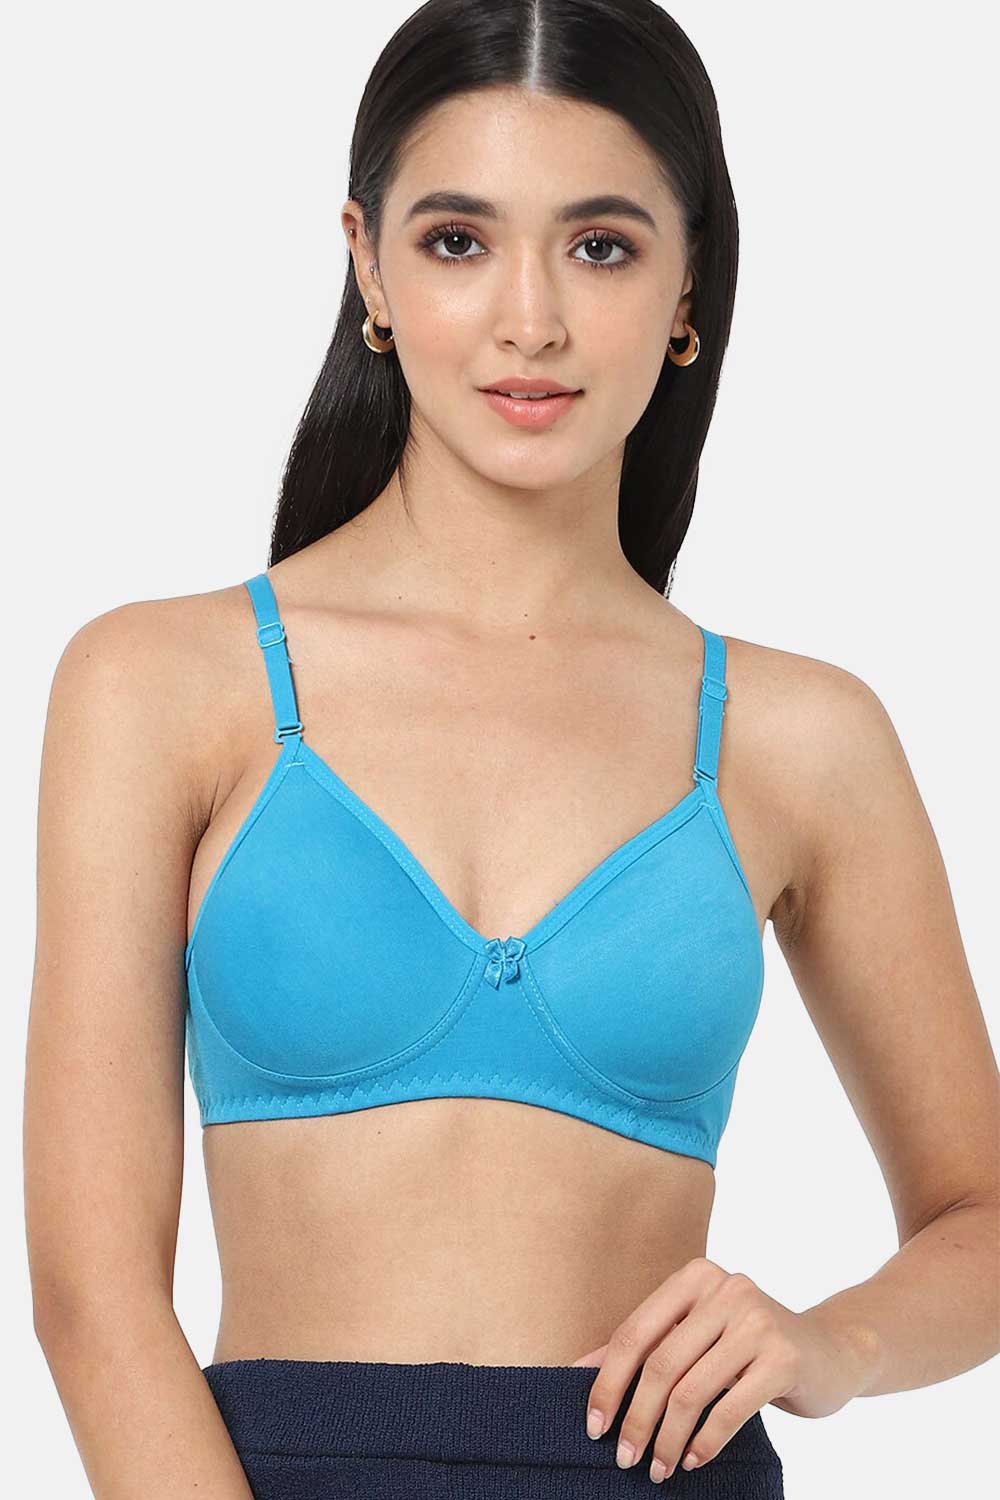 Buy online Brown Cotton Tshirt Bra from lingerie for Women by Viral Girl  for ₹419 at 48% off